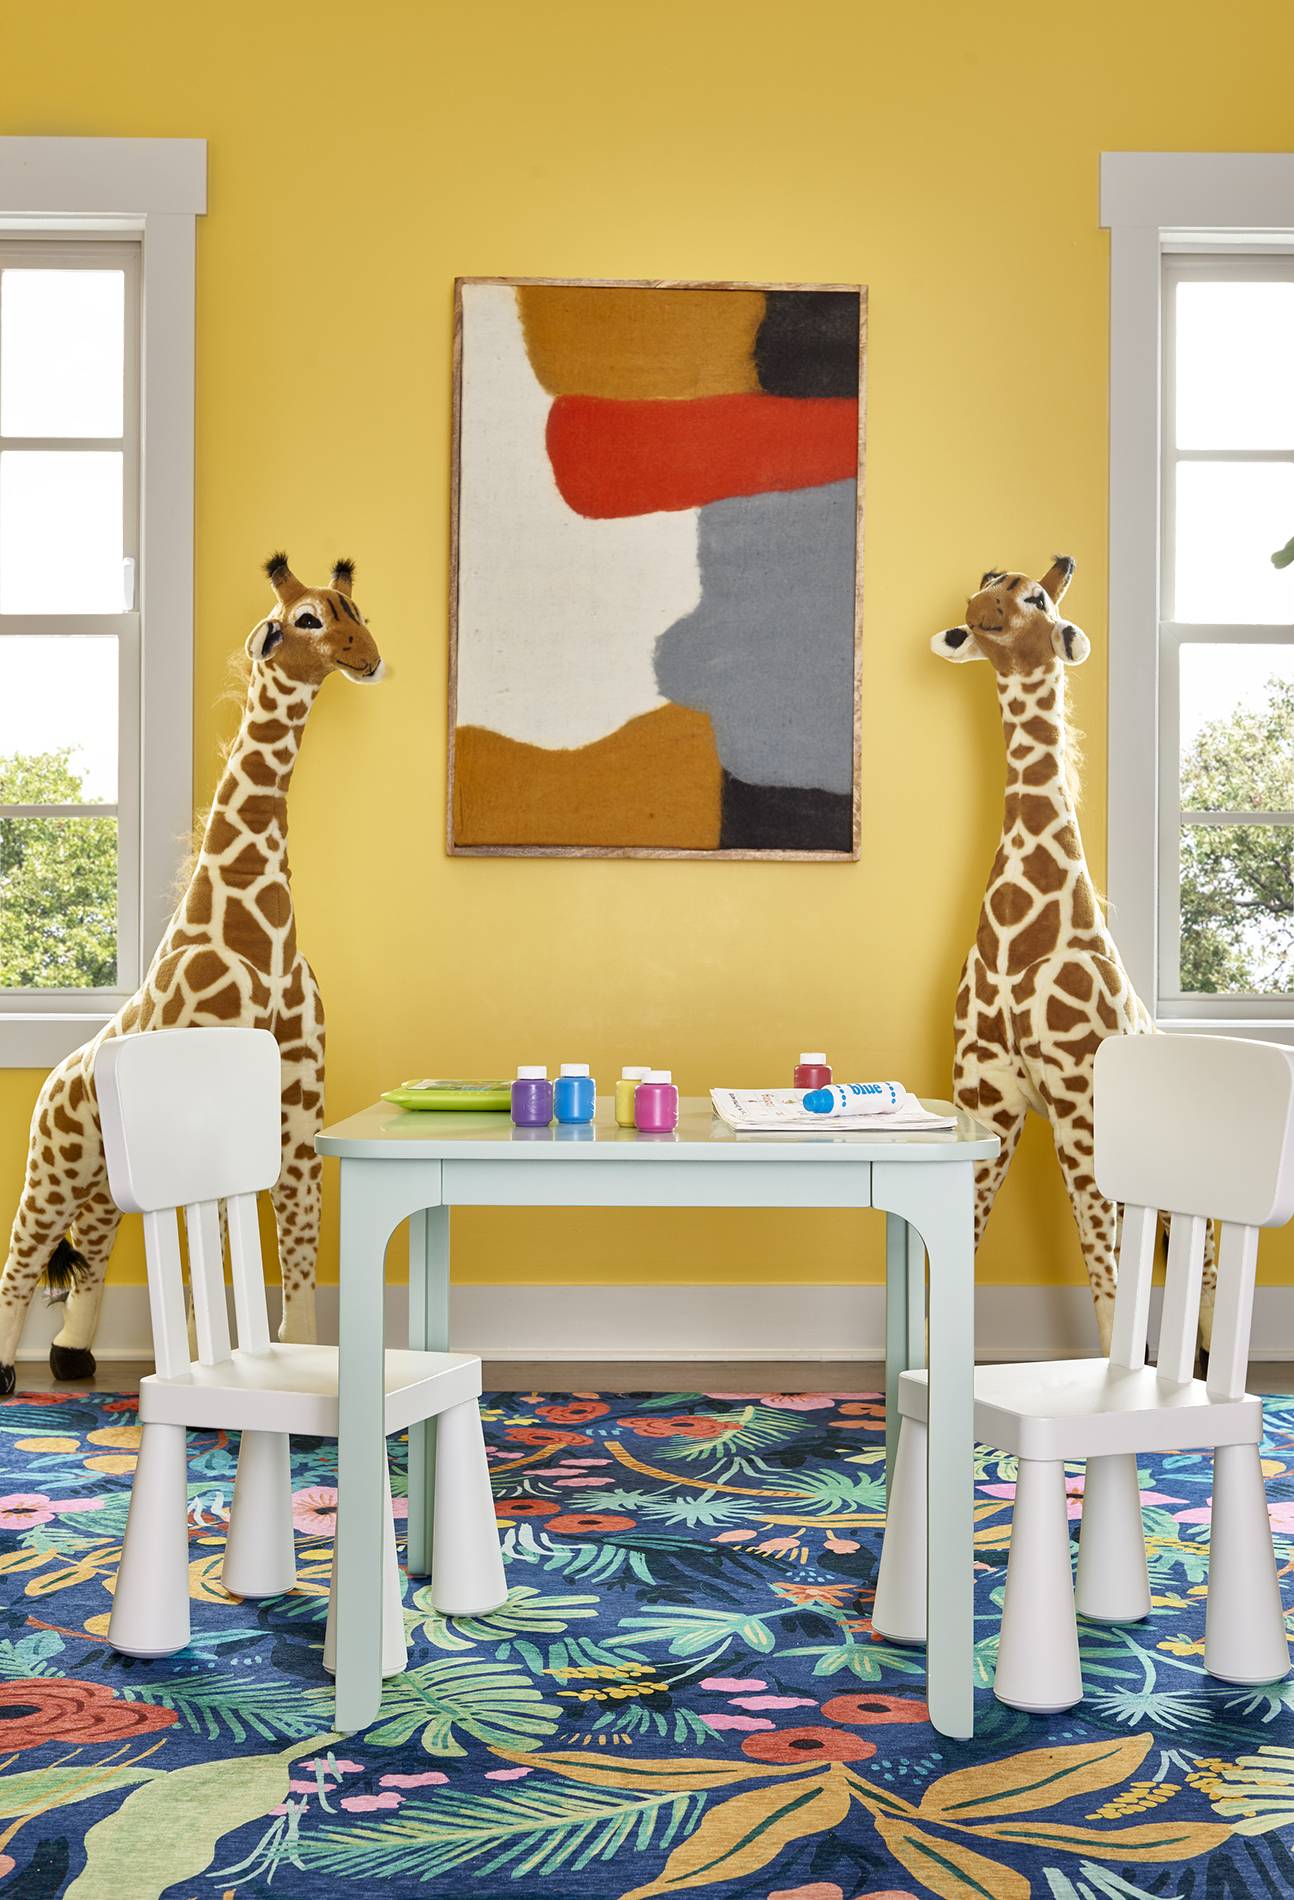 Leah Alexander interior design of children's play room, photo by Marc Mauldin